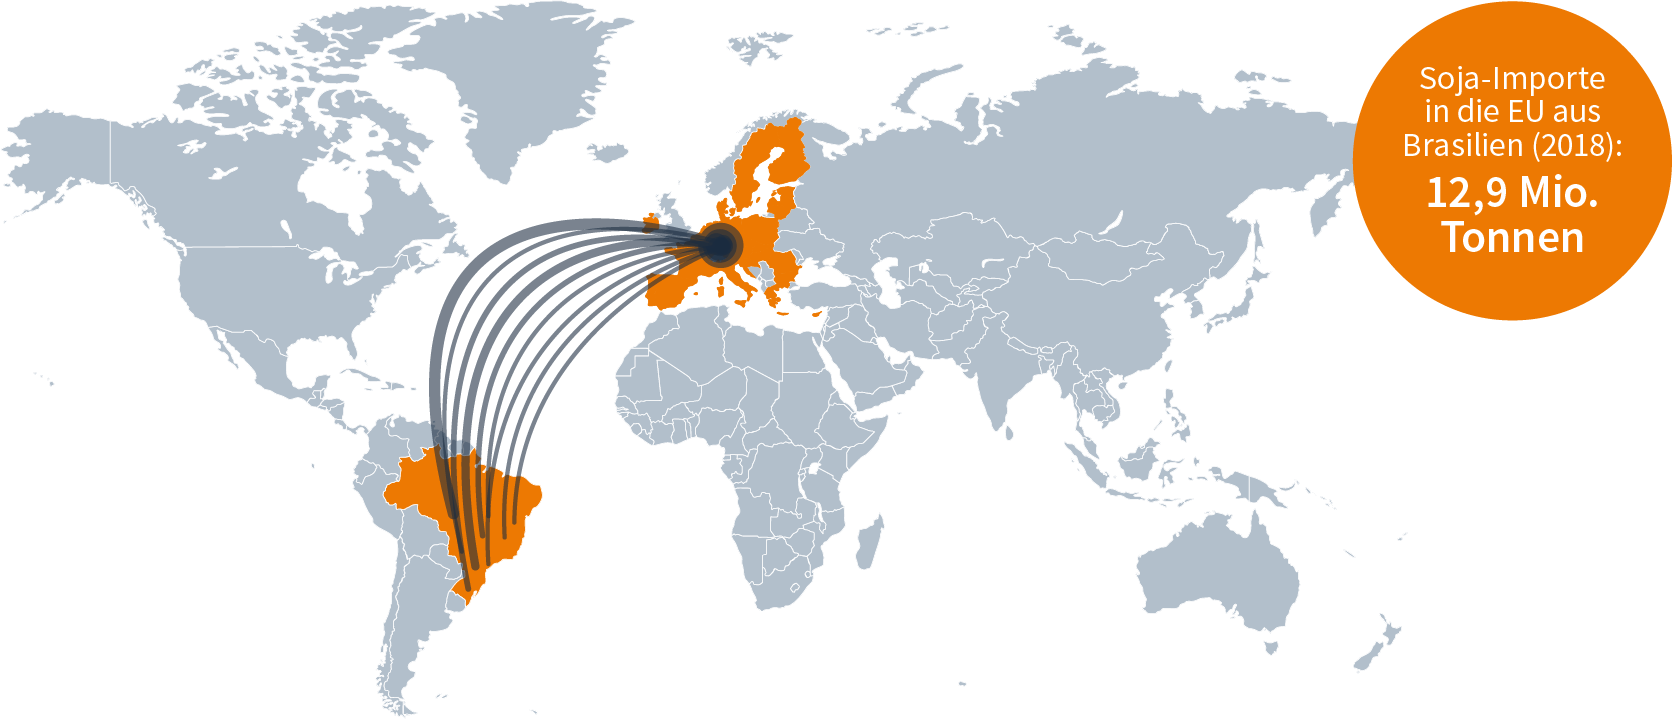 World map with arrows indicating trade flows from Mercosur countries to the European Union.